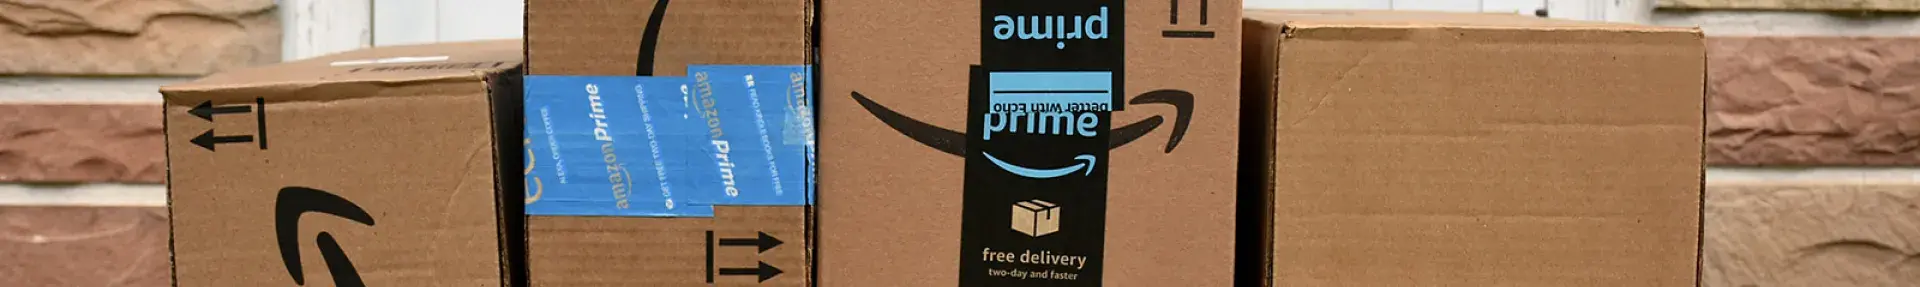 Image: stack of Amazon boxes in front of door. Topic: Why Is Amazon Bad?